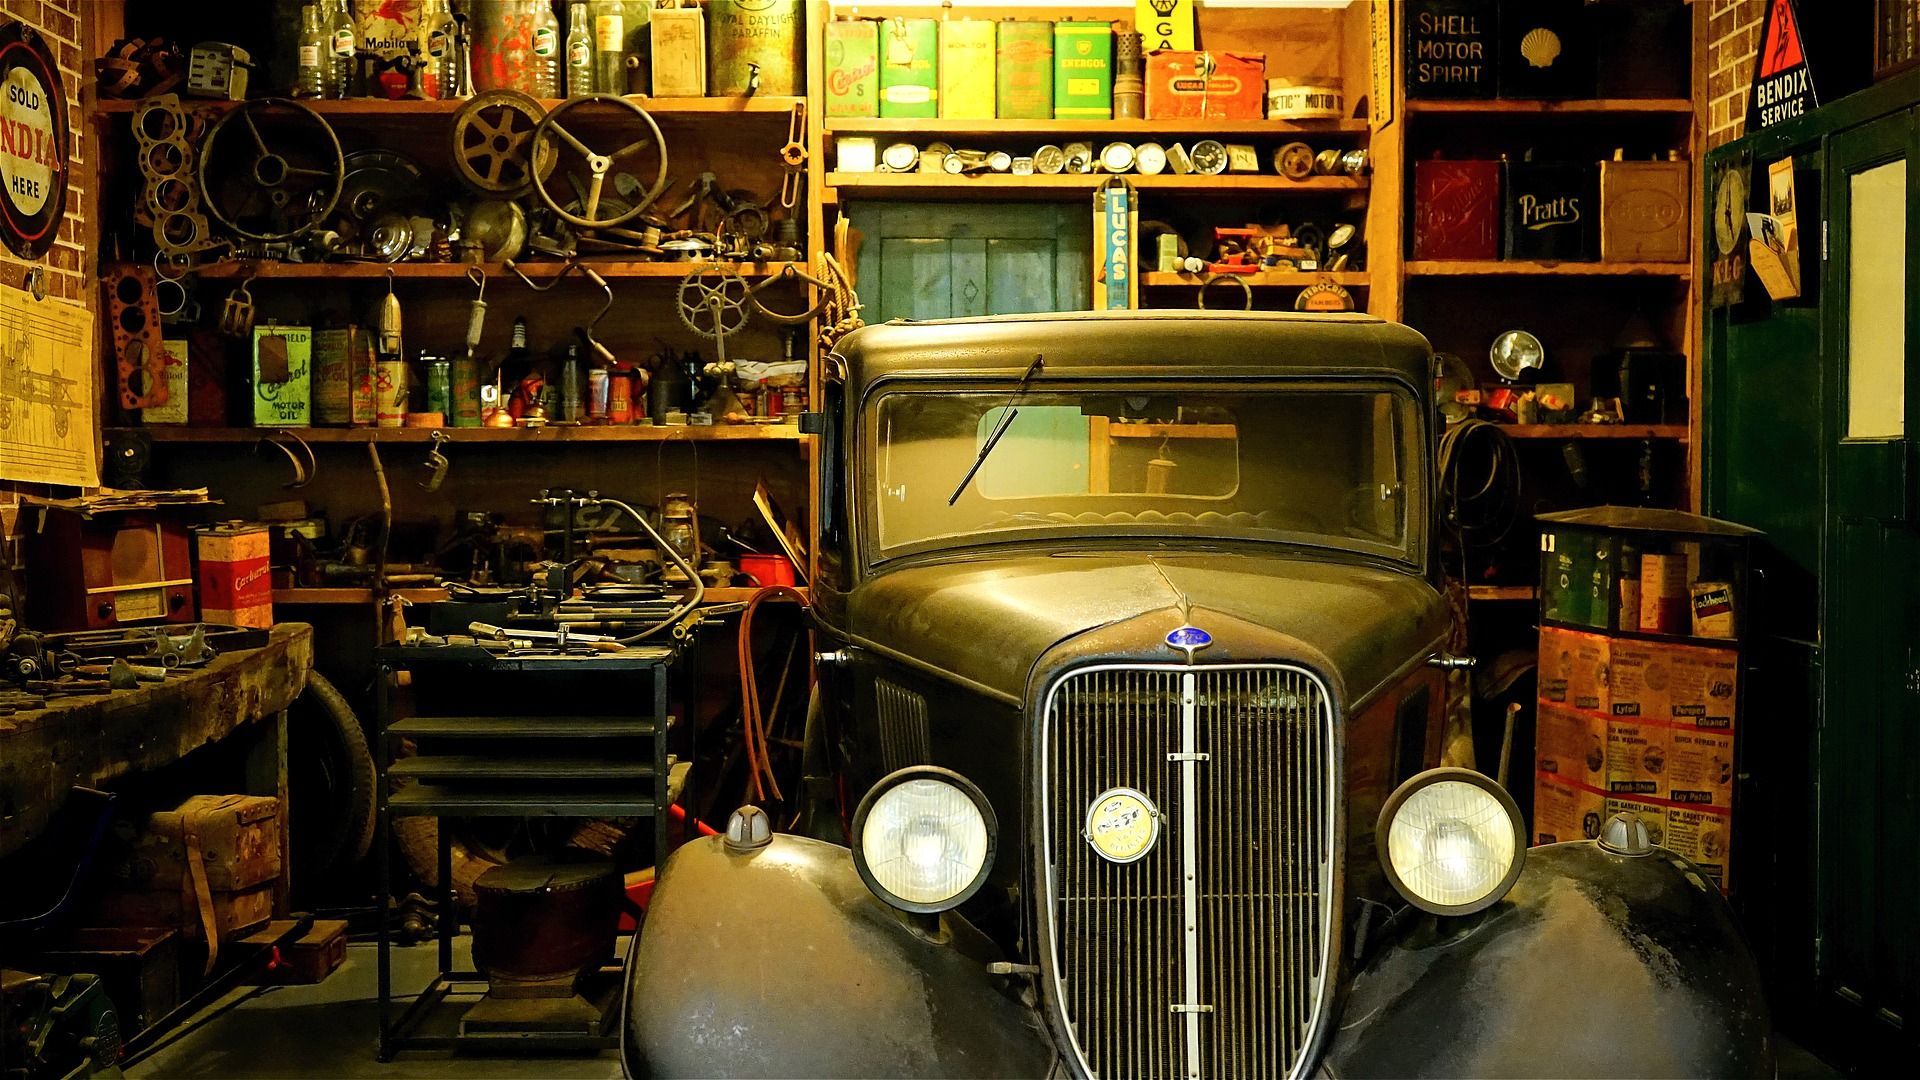 Dimly lit garage with antique car, tools, hardware and shelves of chemicals with labels.